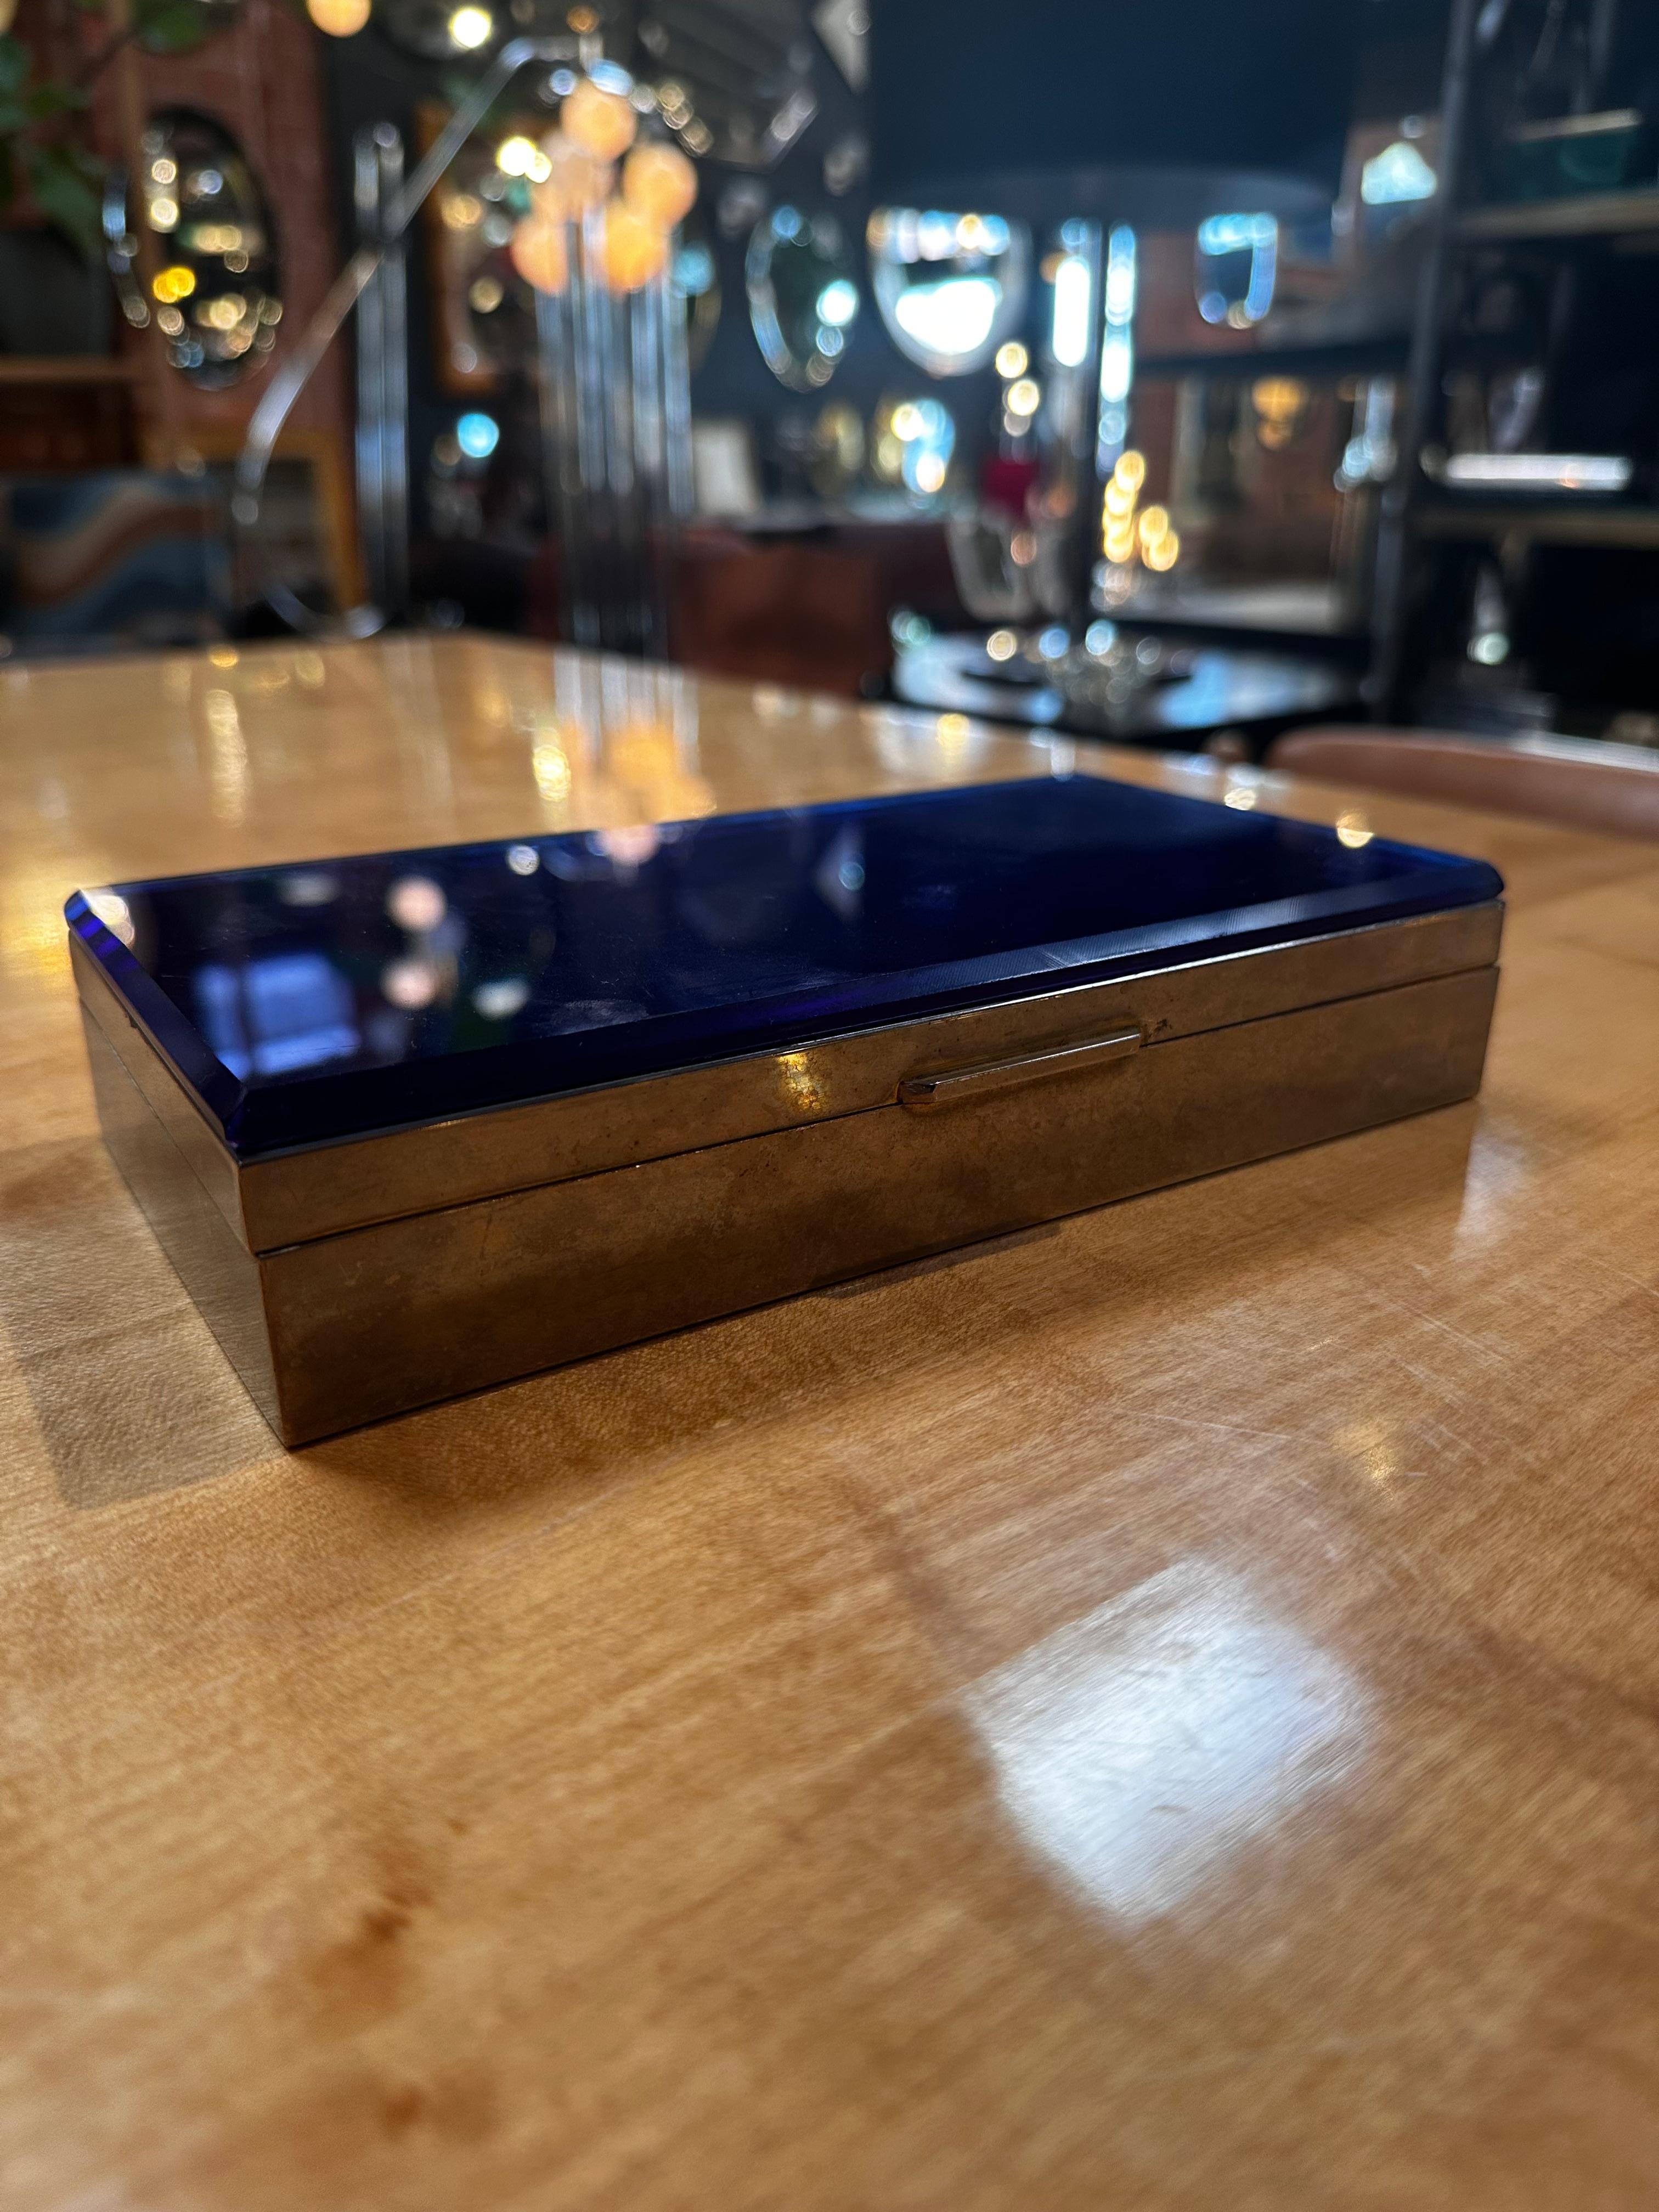 The Vintage Decorative Unique Blue Box from the 1960s, featuring a blue top glass and chrome base, is a stylish and distinctive retro piece. Crafted in the mid-20th century, the combination of the vibrant blue glass and sleek chrome base creates a